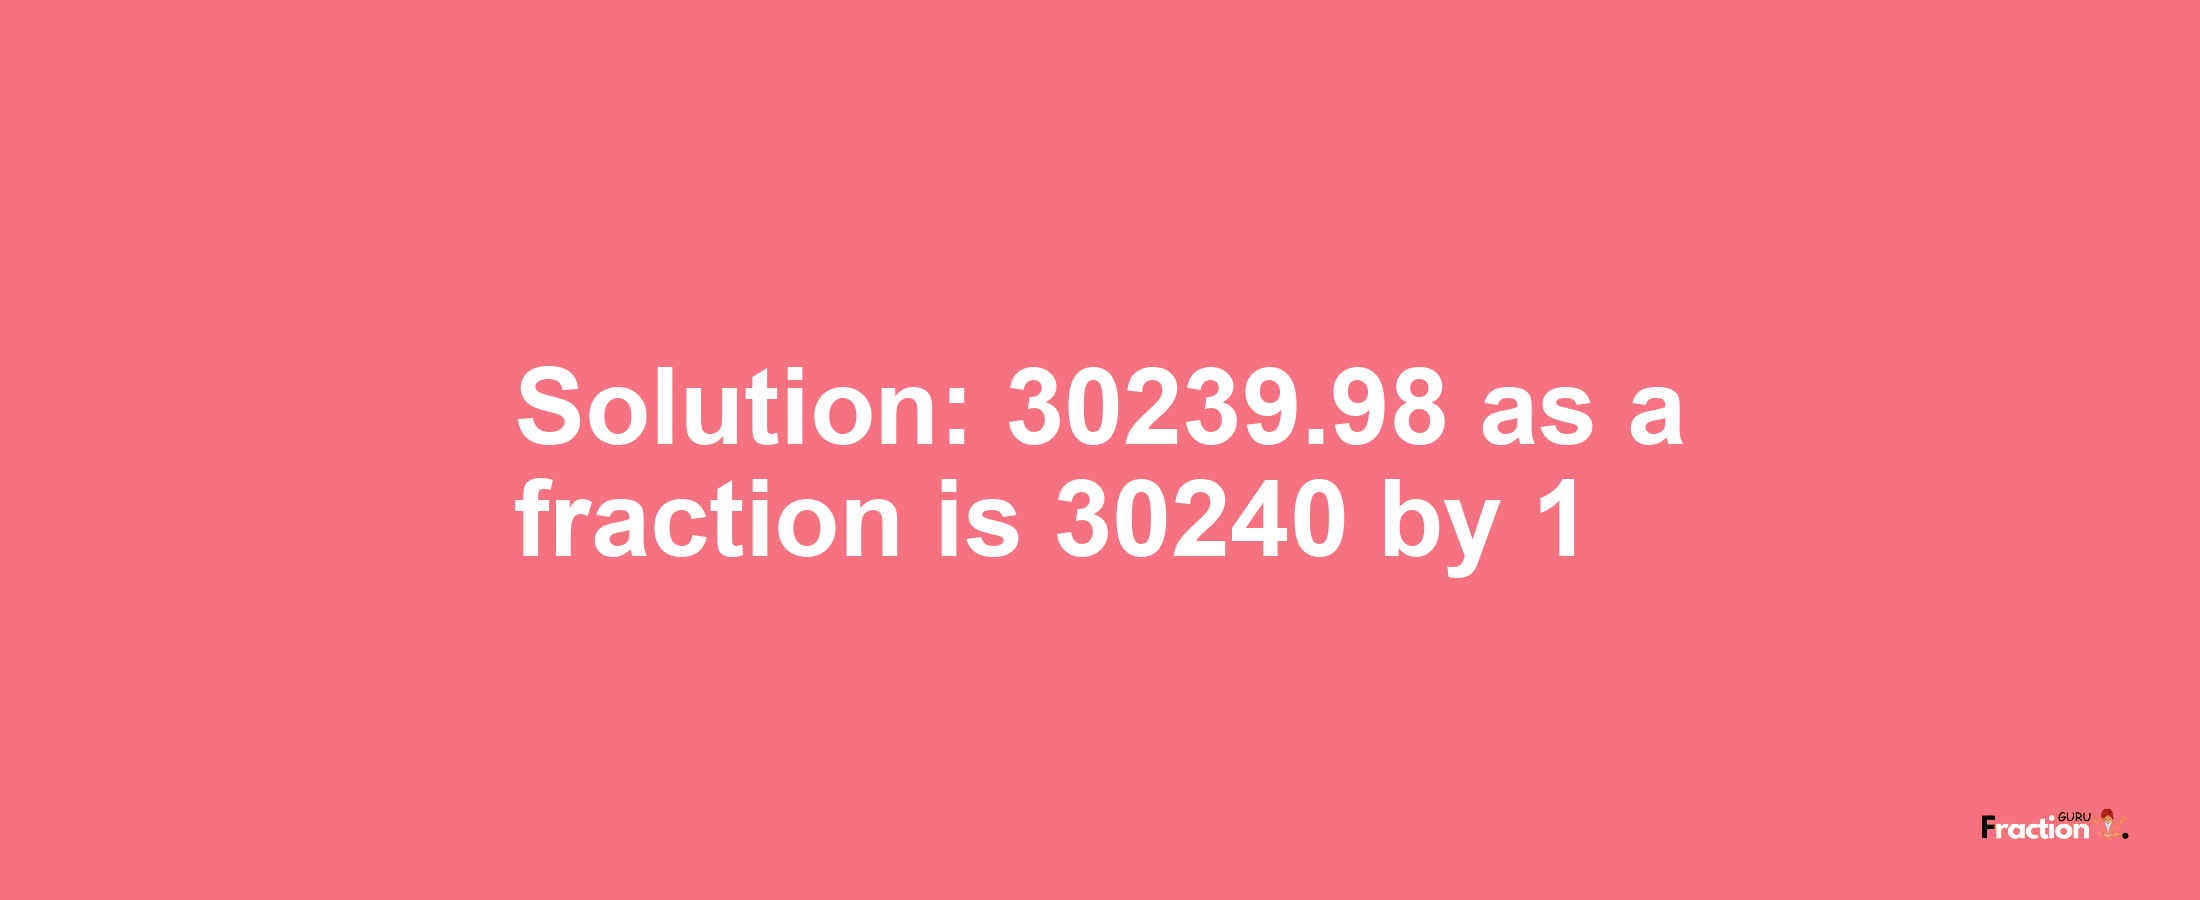 Solution:30239.98 as a fraction is 30240/1